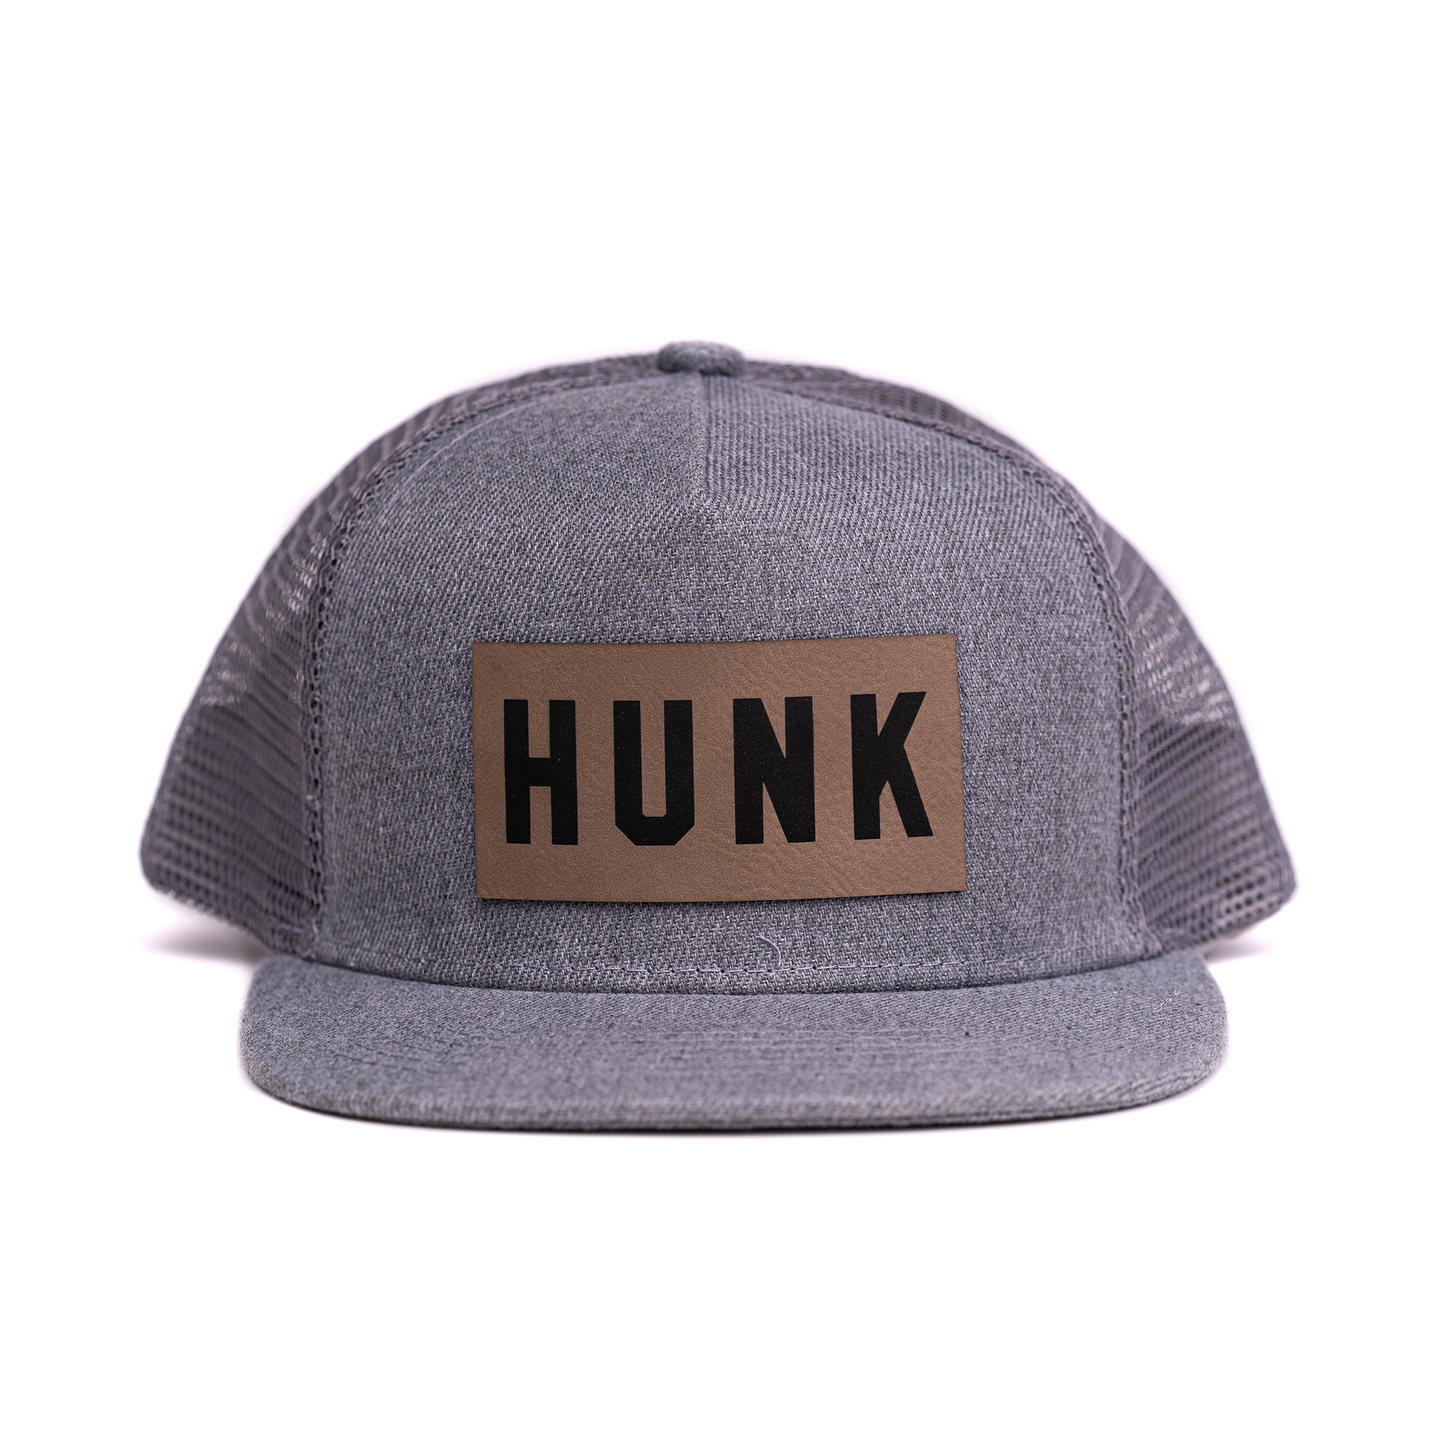 Hunk (Leather Patch) - Kids Trucker Hat (Heather Gray)